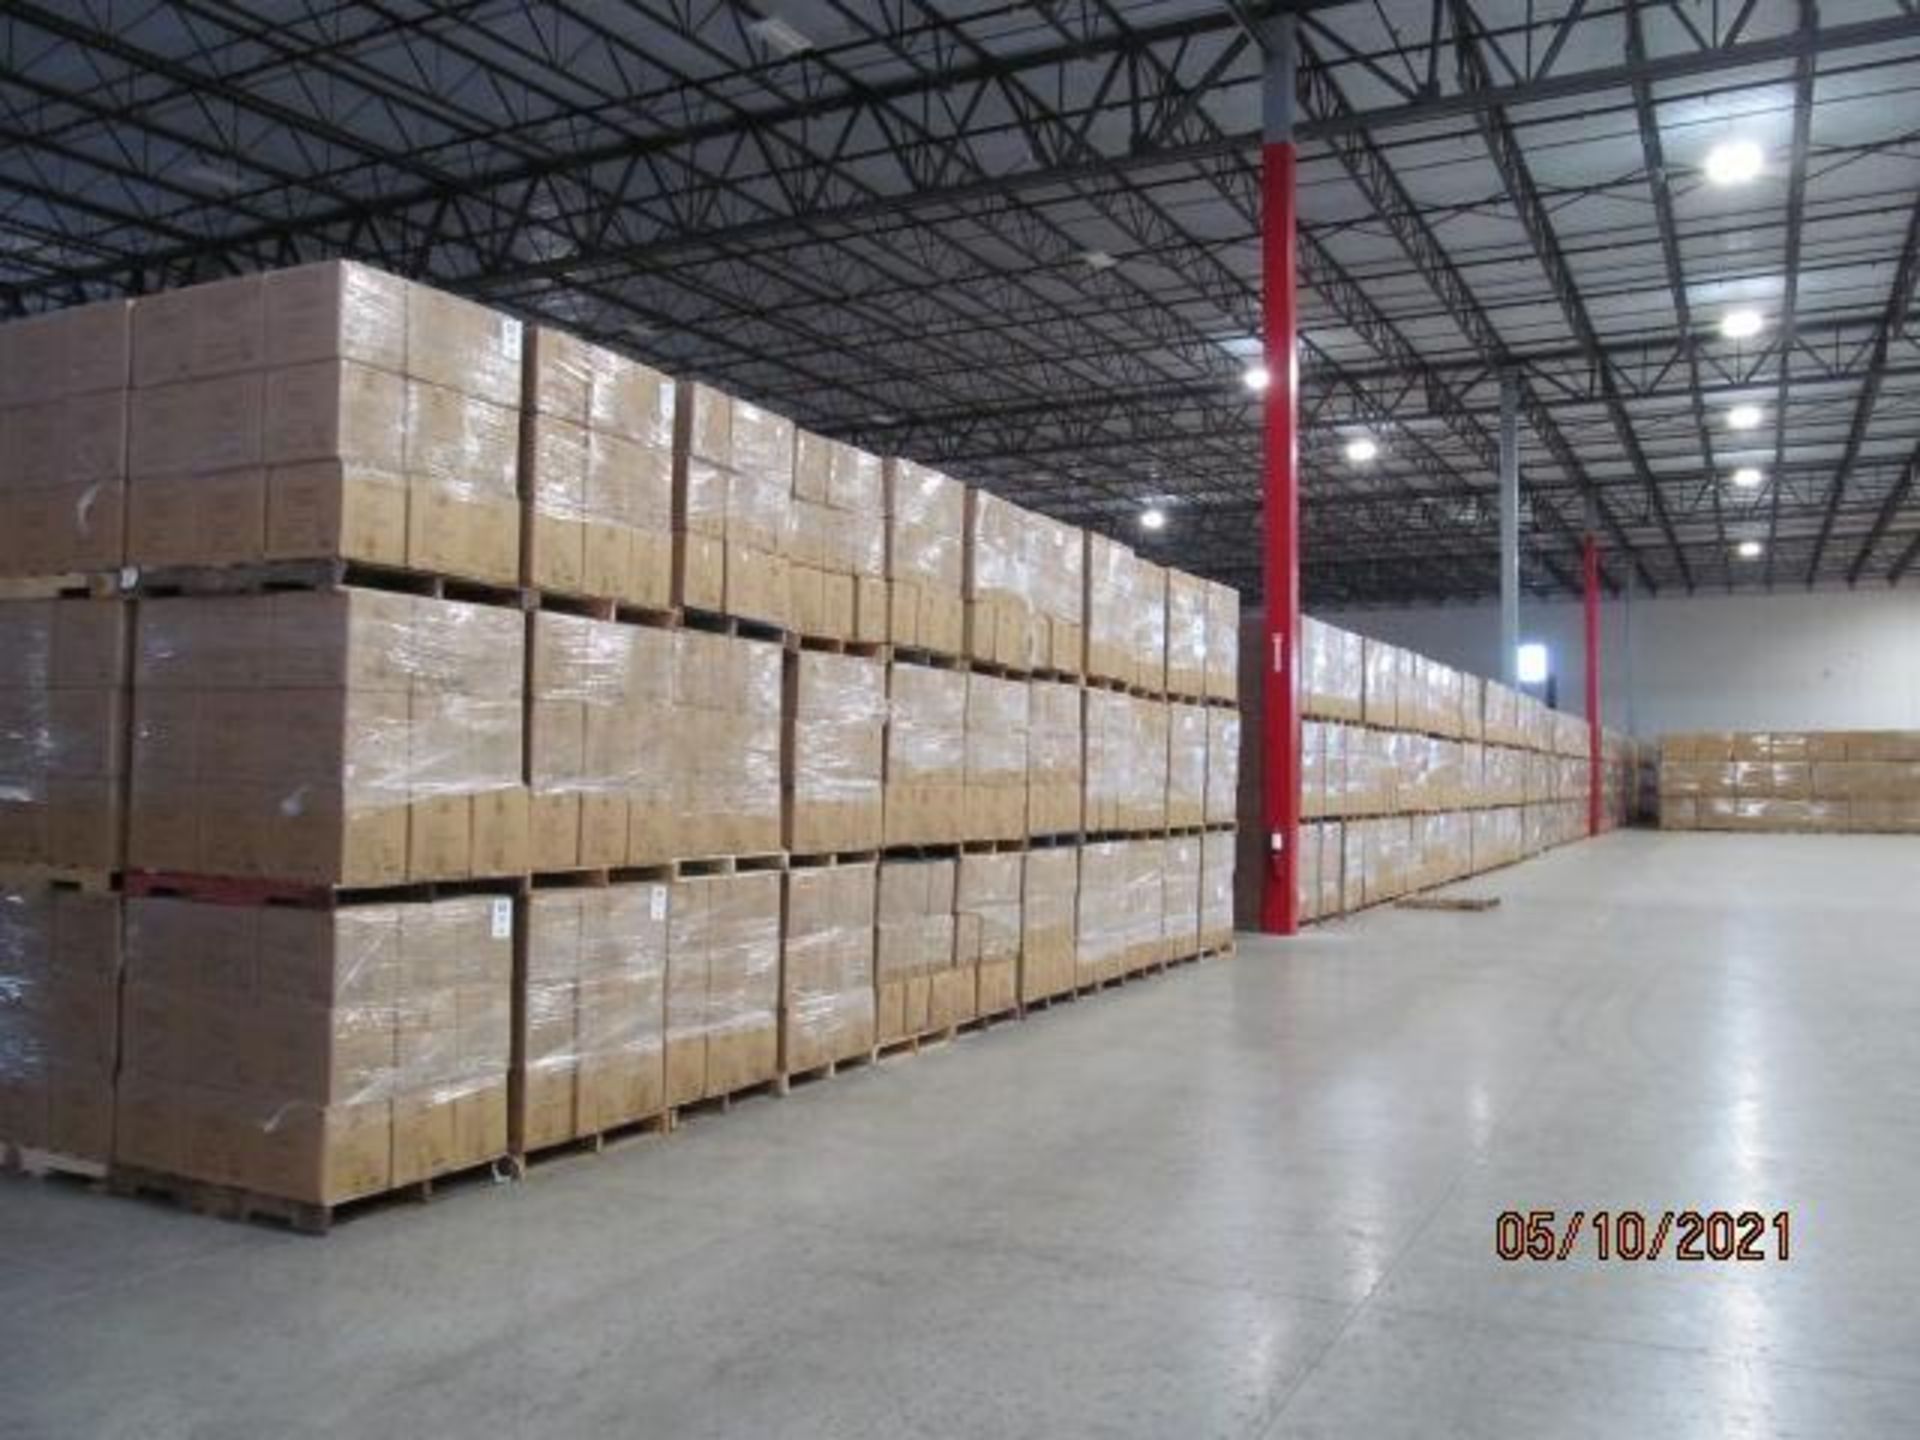 Lot of Waxman Kleen Freak Sanitizing Wipes consisting of 12,960 packages on 20 pallets. Each package - Image 8 of 11